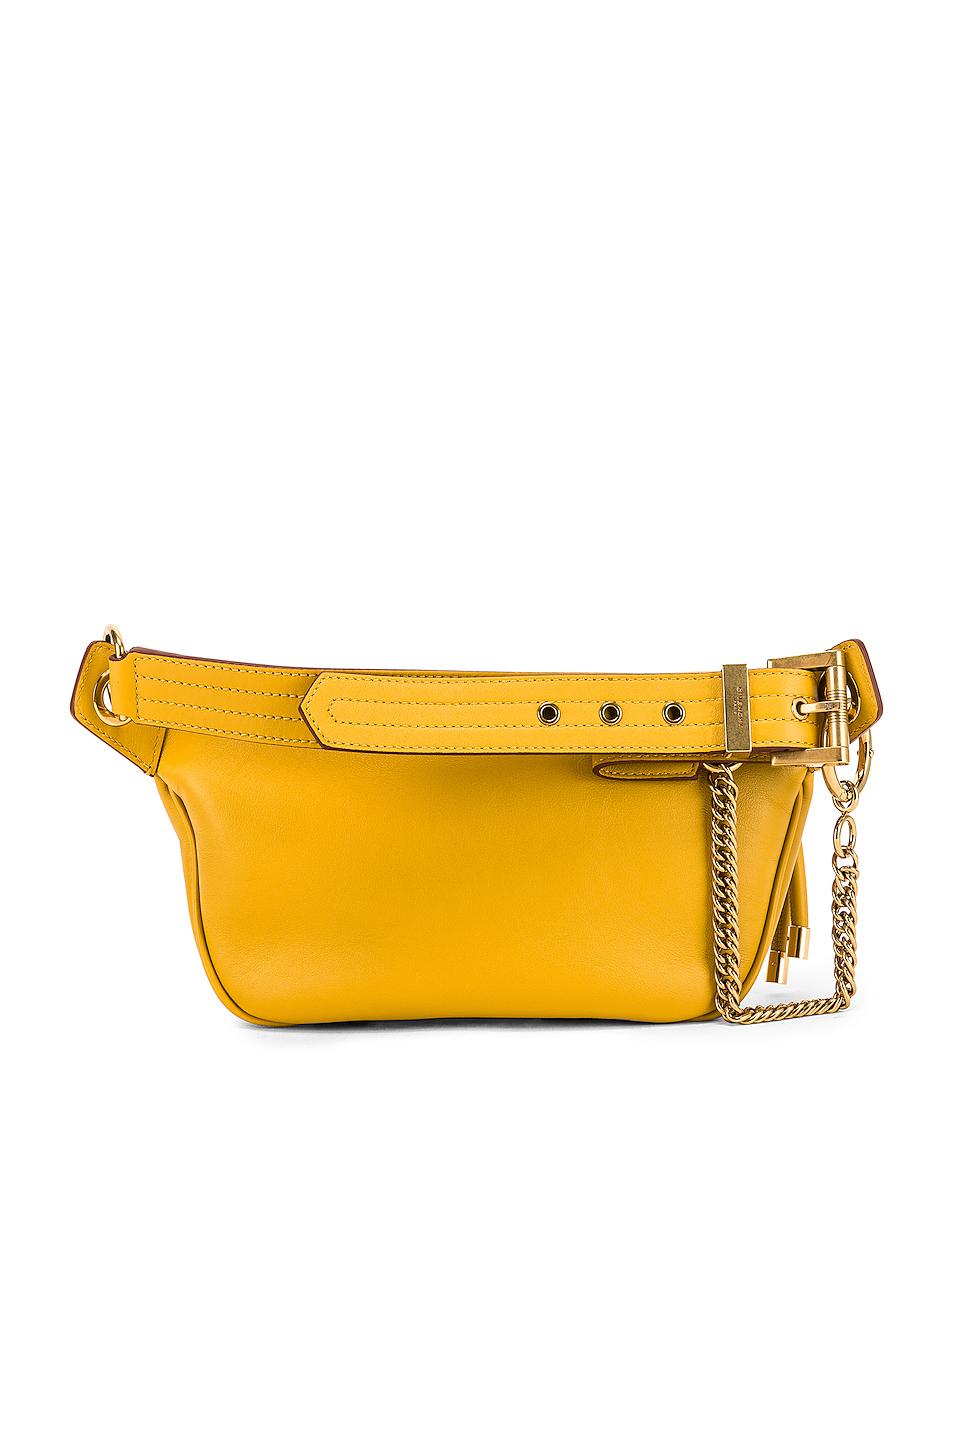 Givenchy Leather Whip Chain Belt Bag in Yellow - Lyst